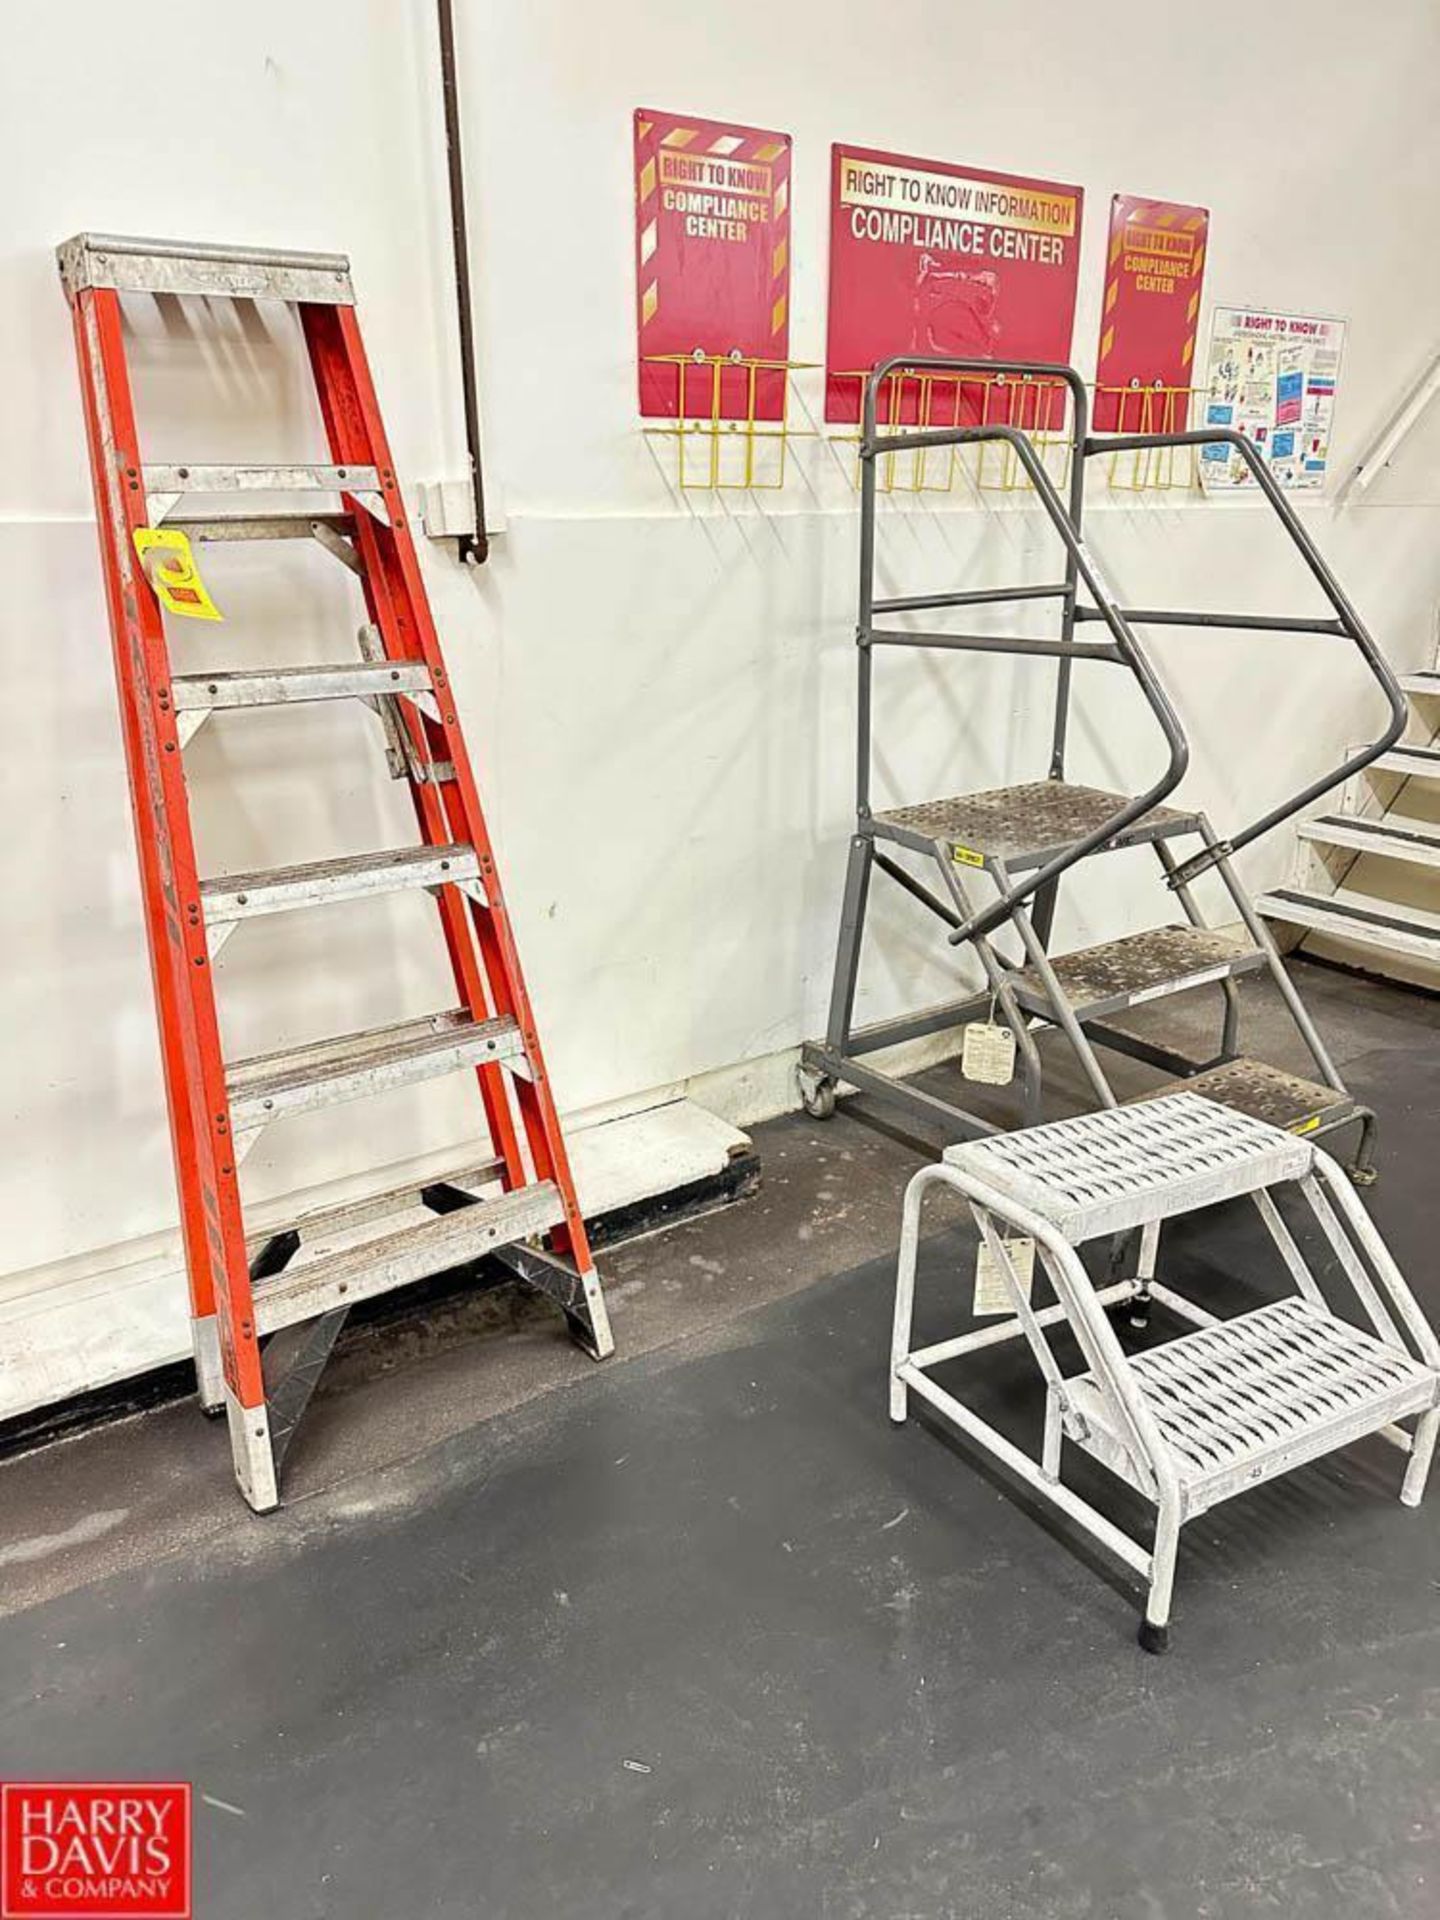 Werner 6' Ladder and Tri-Arc Portable Stairs - Rigging Fee: $125